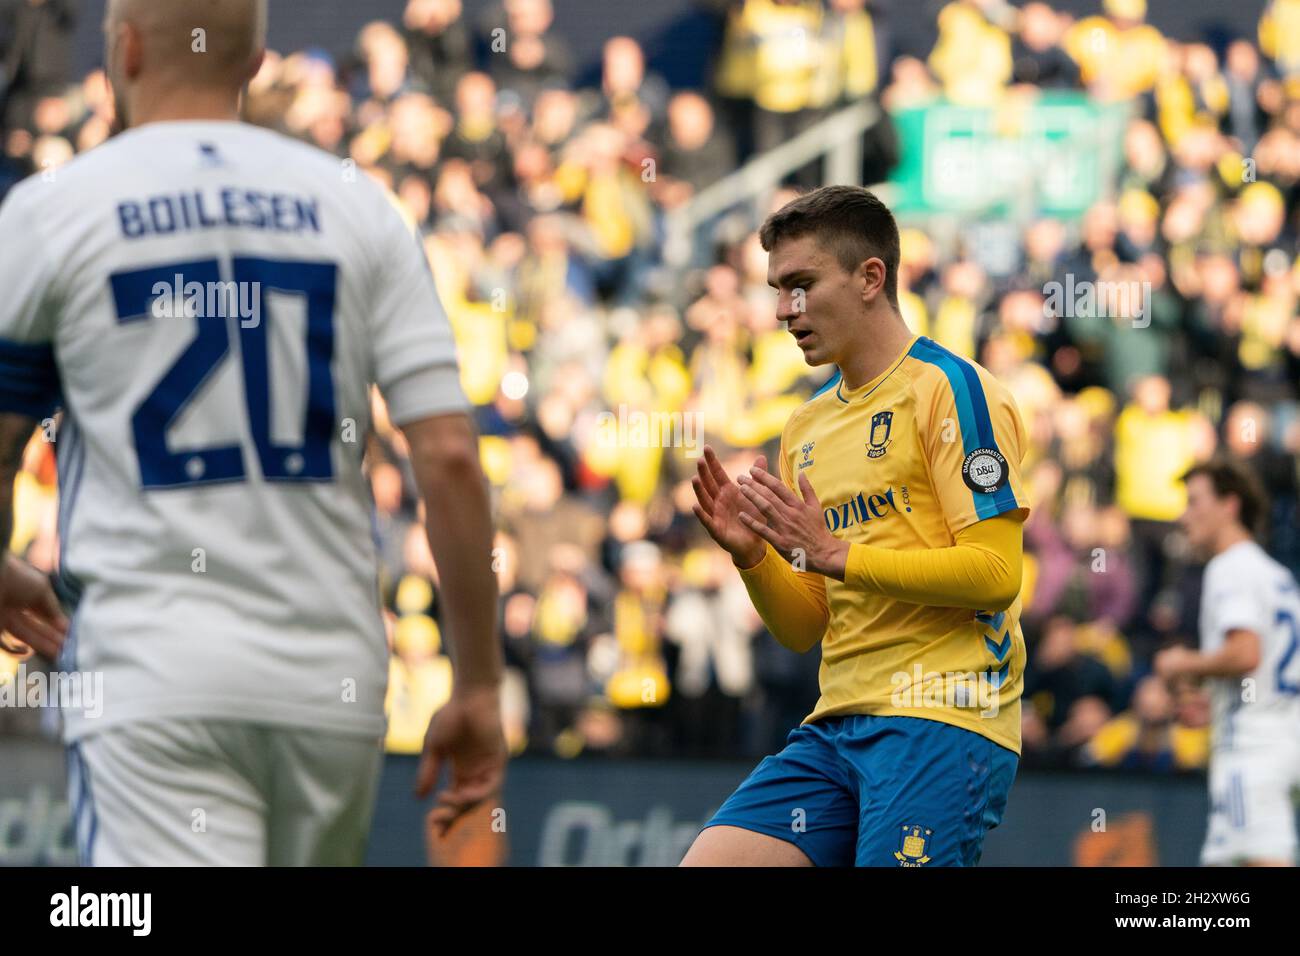 Broendby, Denmark. 24th Oct, 2021. Mikael Uhre (11) of Broendby IF seen during the 3F Superliga match between Broendby IF and FC Copenhagen at Broendby Stadion in Broendby. (Photo Credit: Gonzales Photo/Alamy Live News Stock Photo